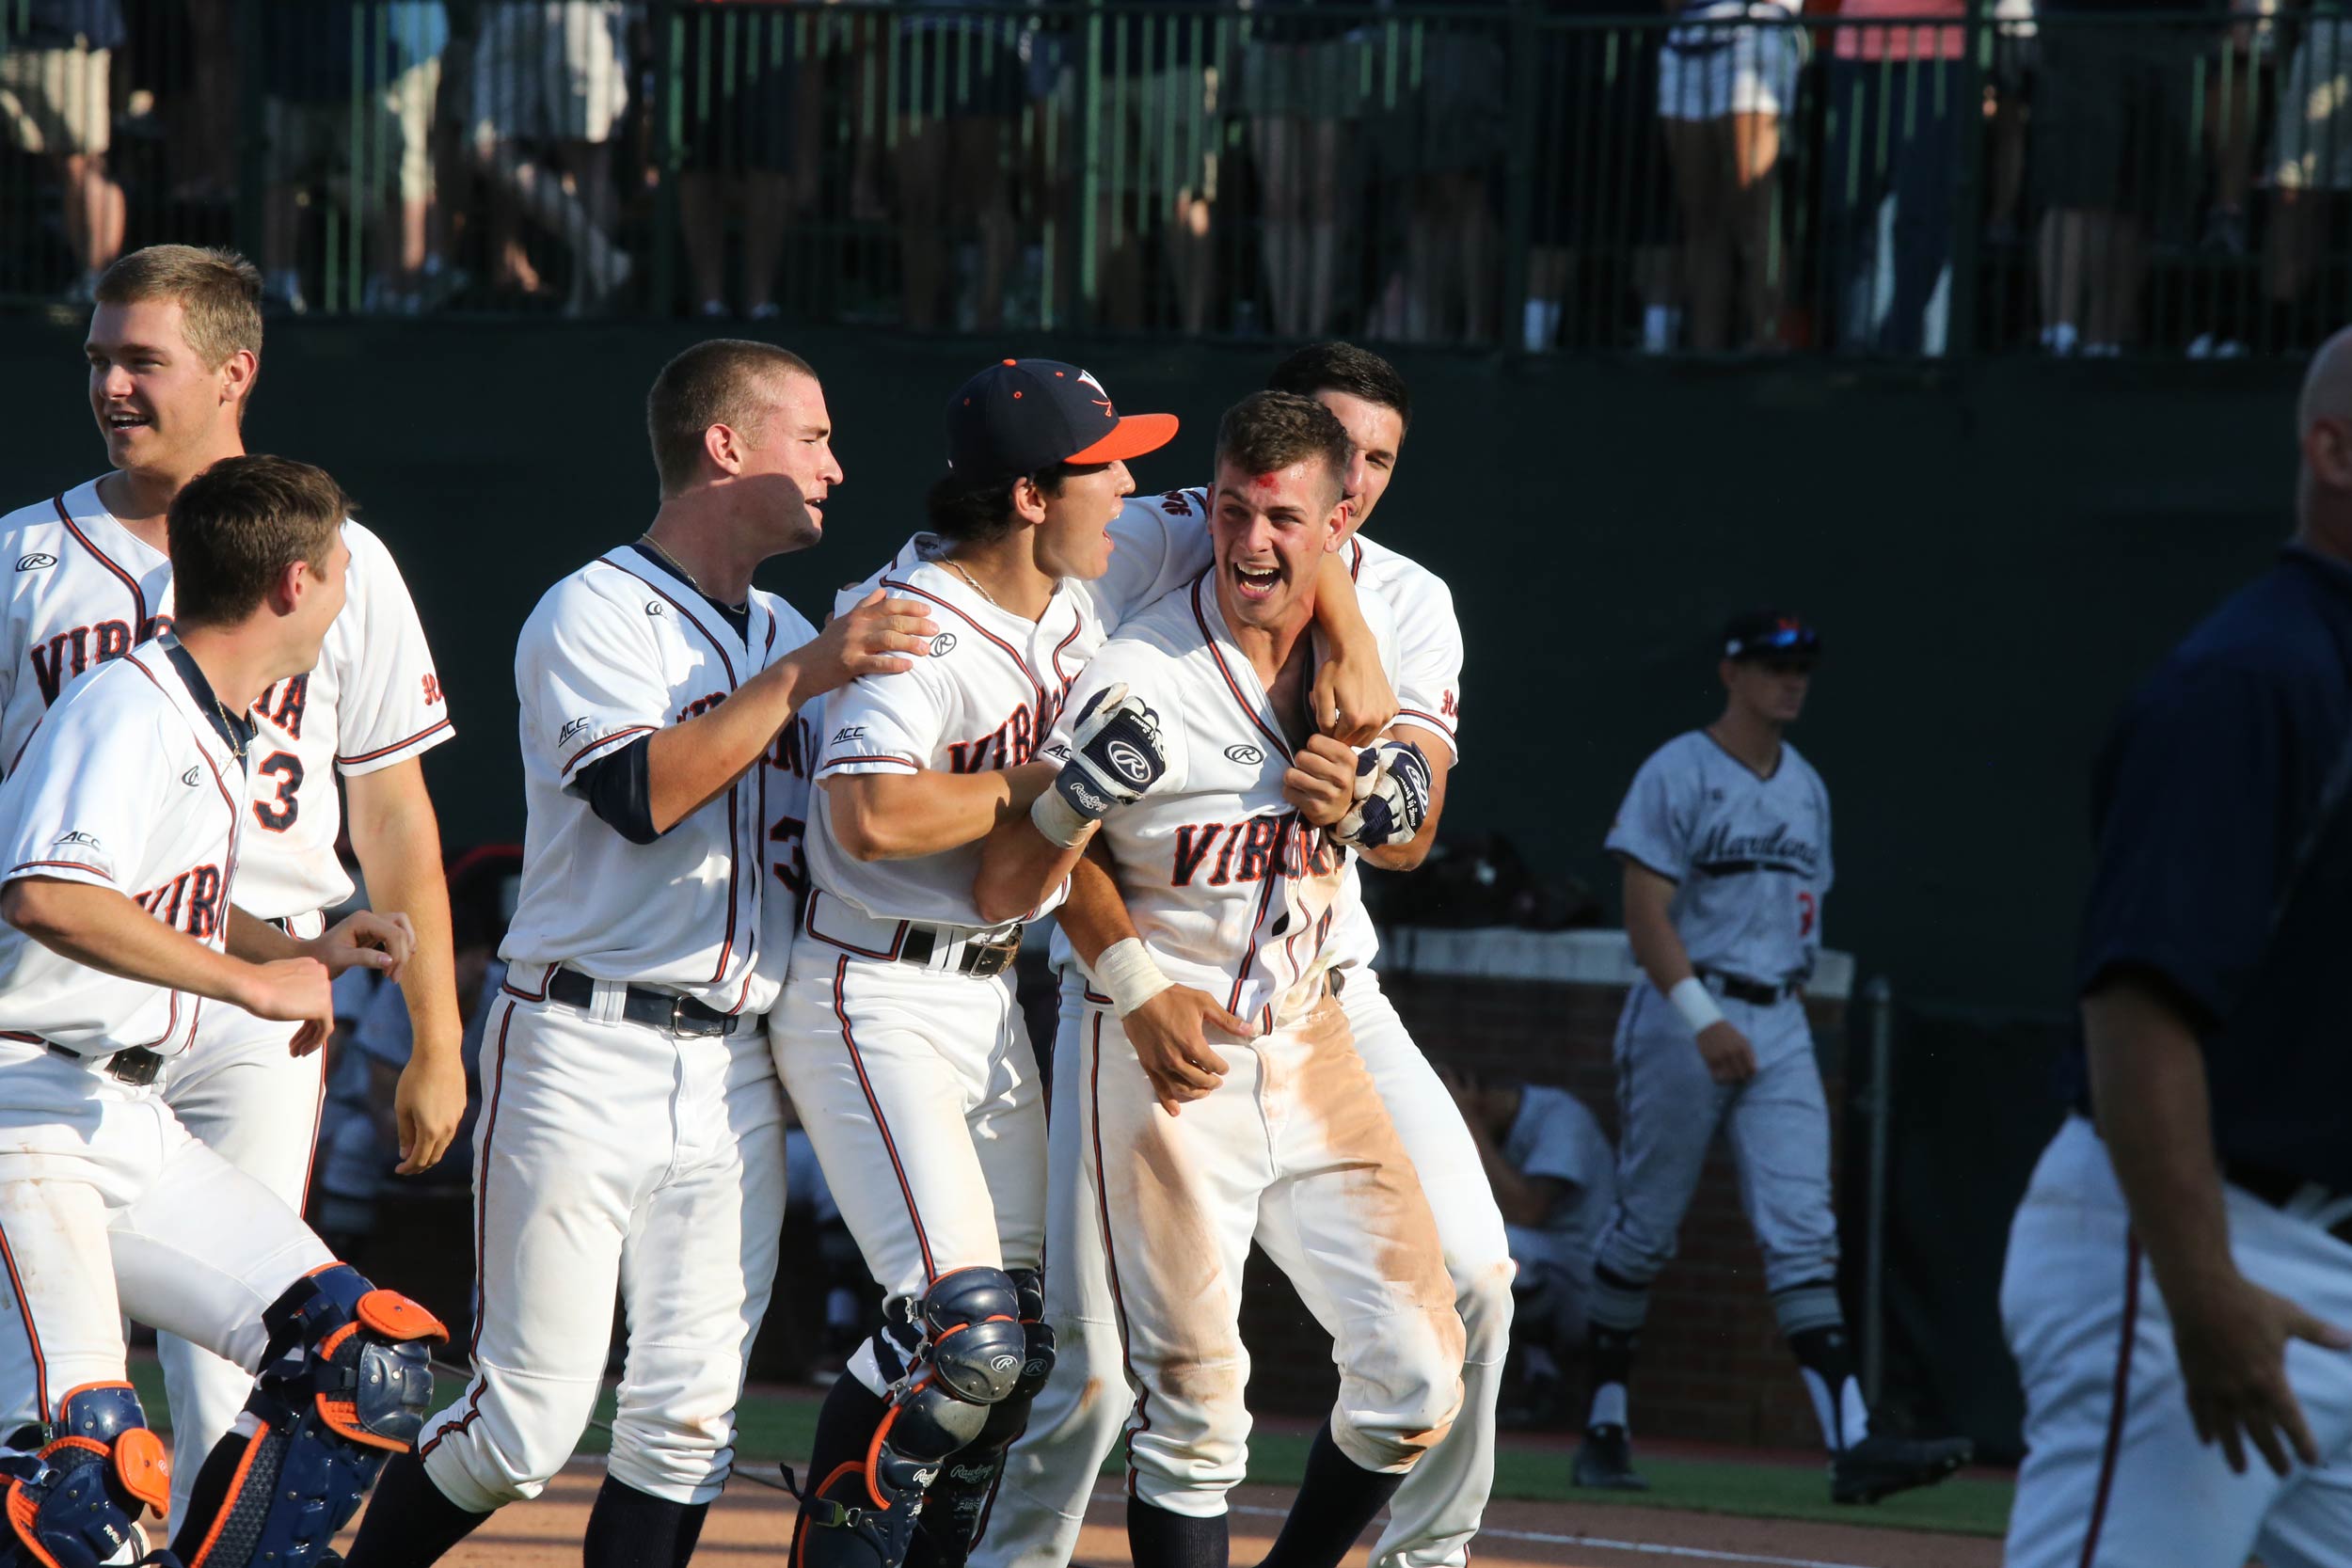 Ernie Clement celebrating with the UVA baseball team after a victory